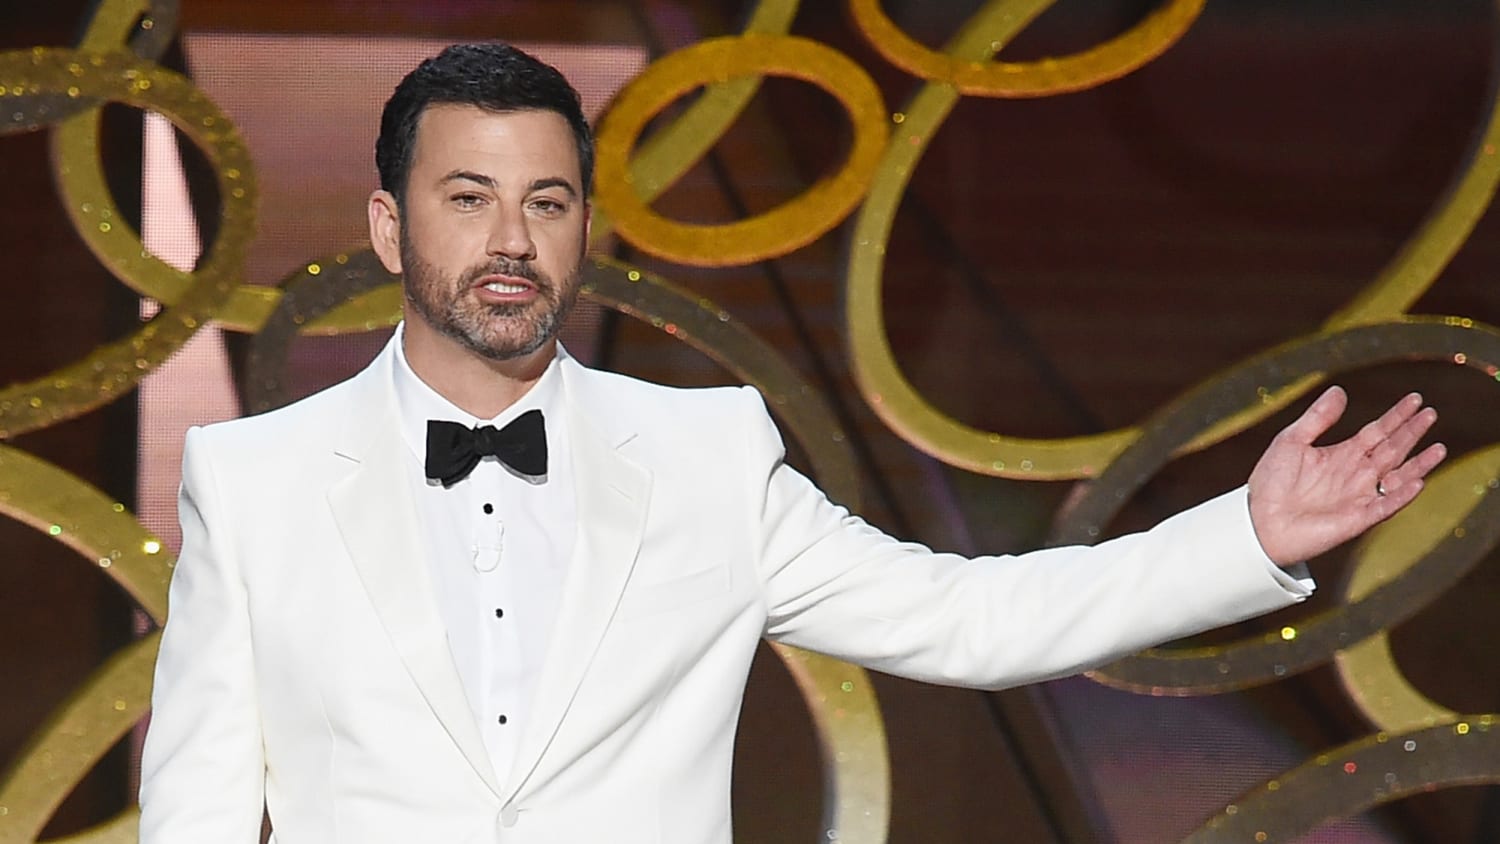 And the 2017 Oscars hosting gig goes to ... Jimmy Kimmel!